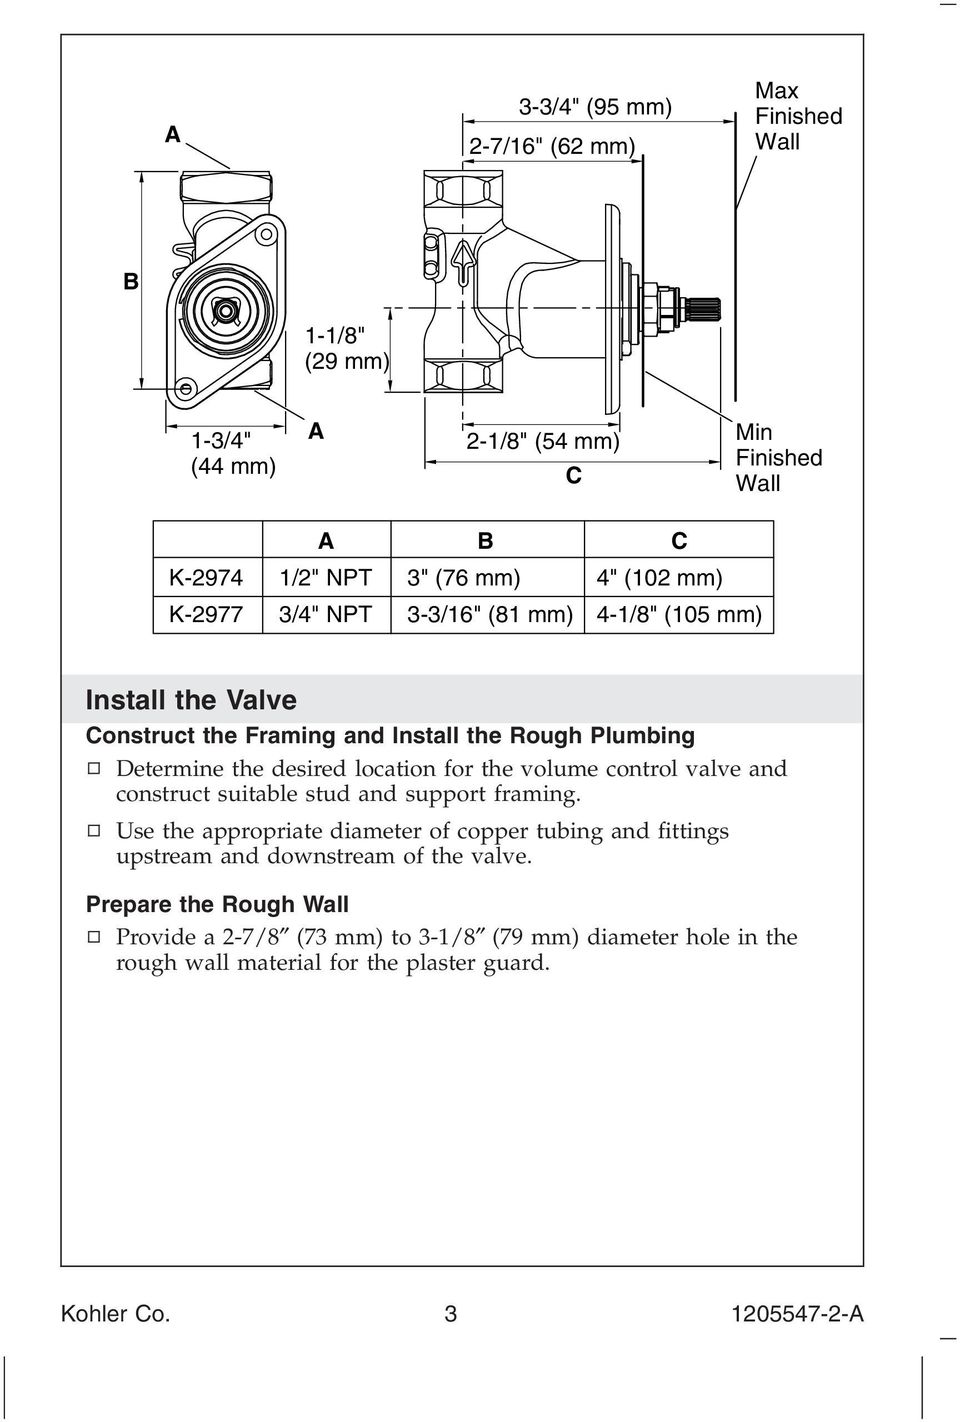 the volume control valve and construct suitable stud and support framing.